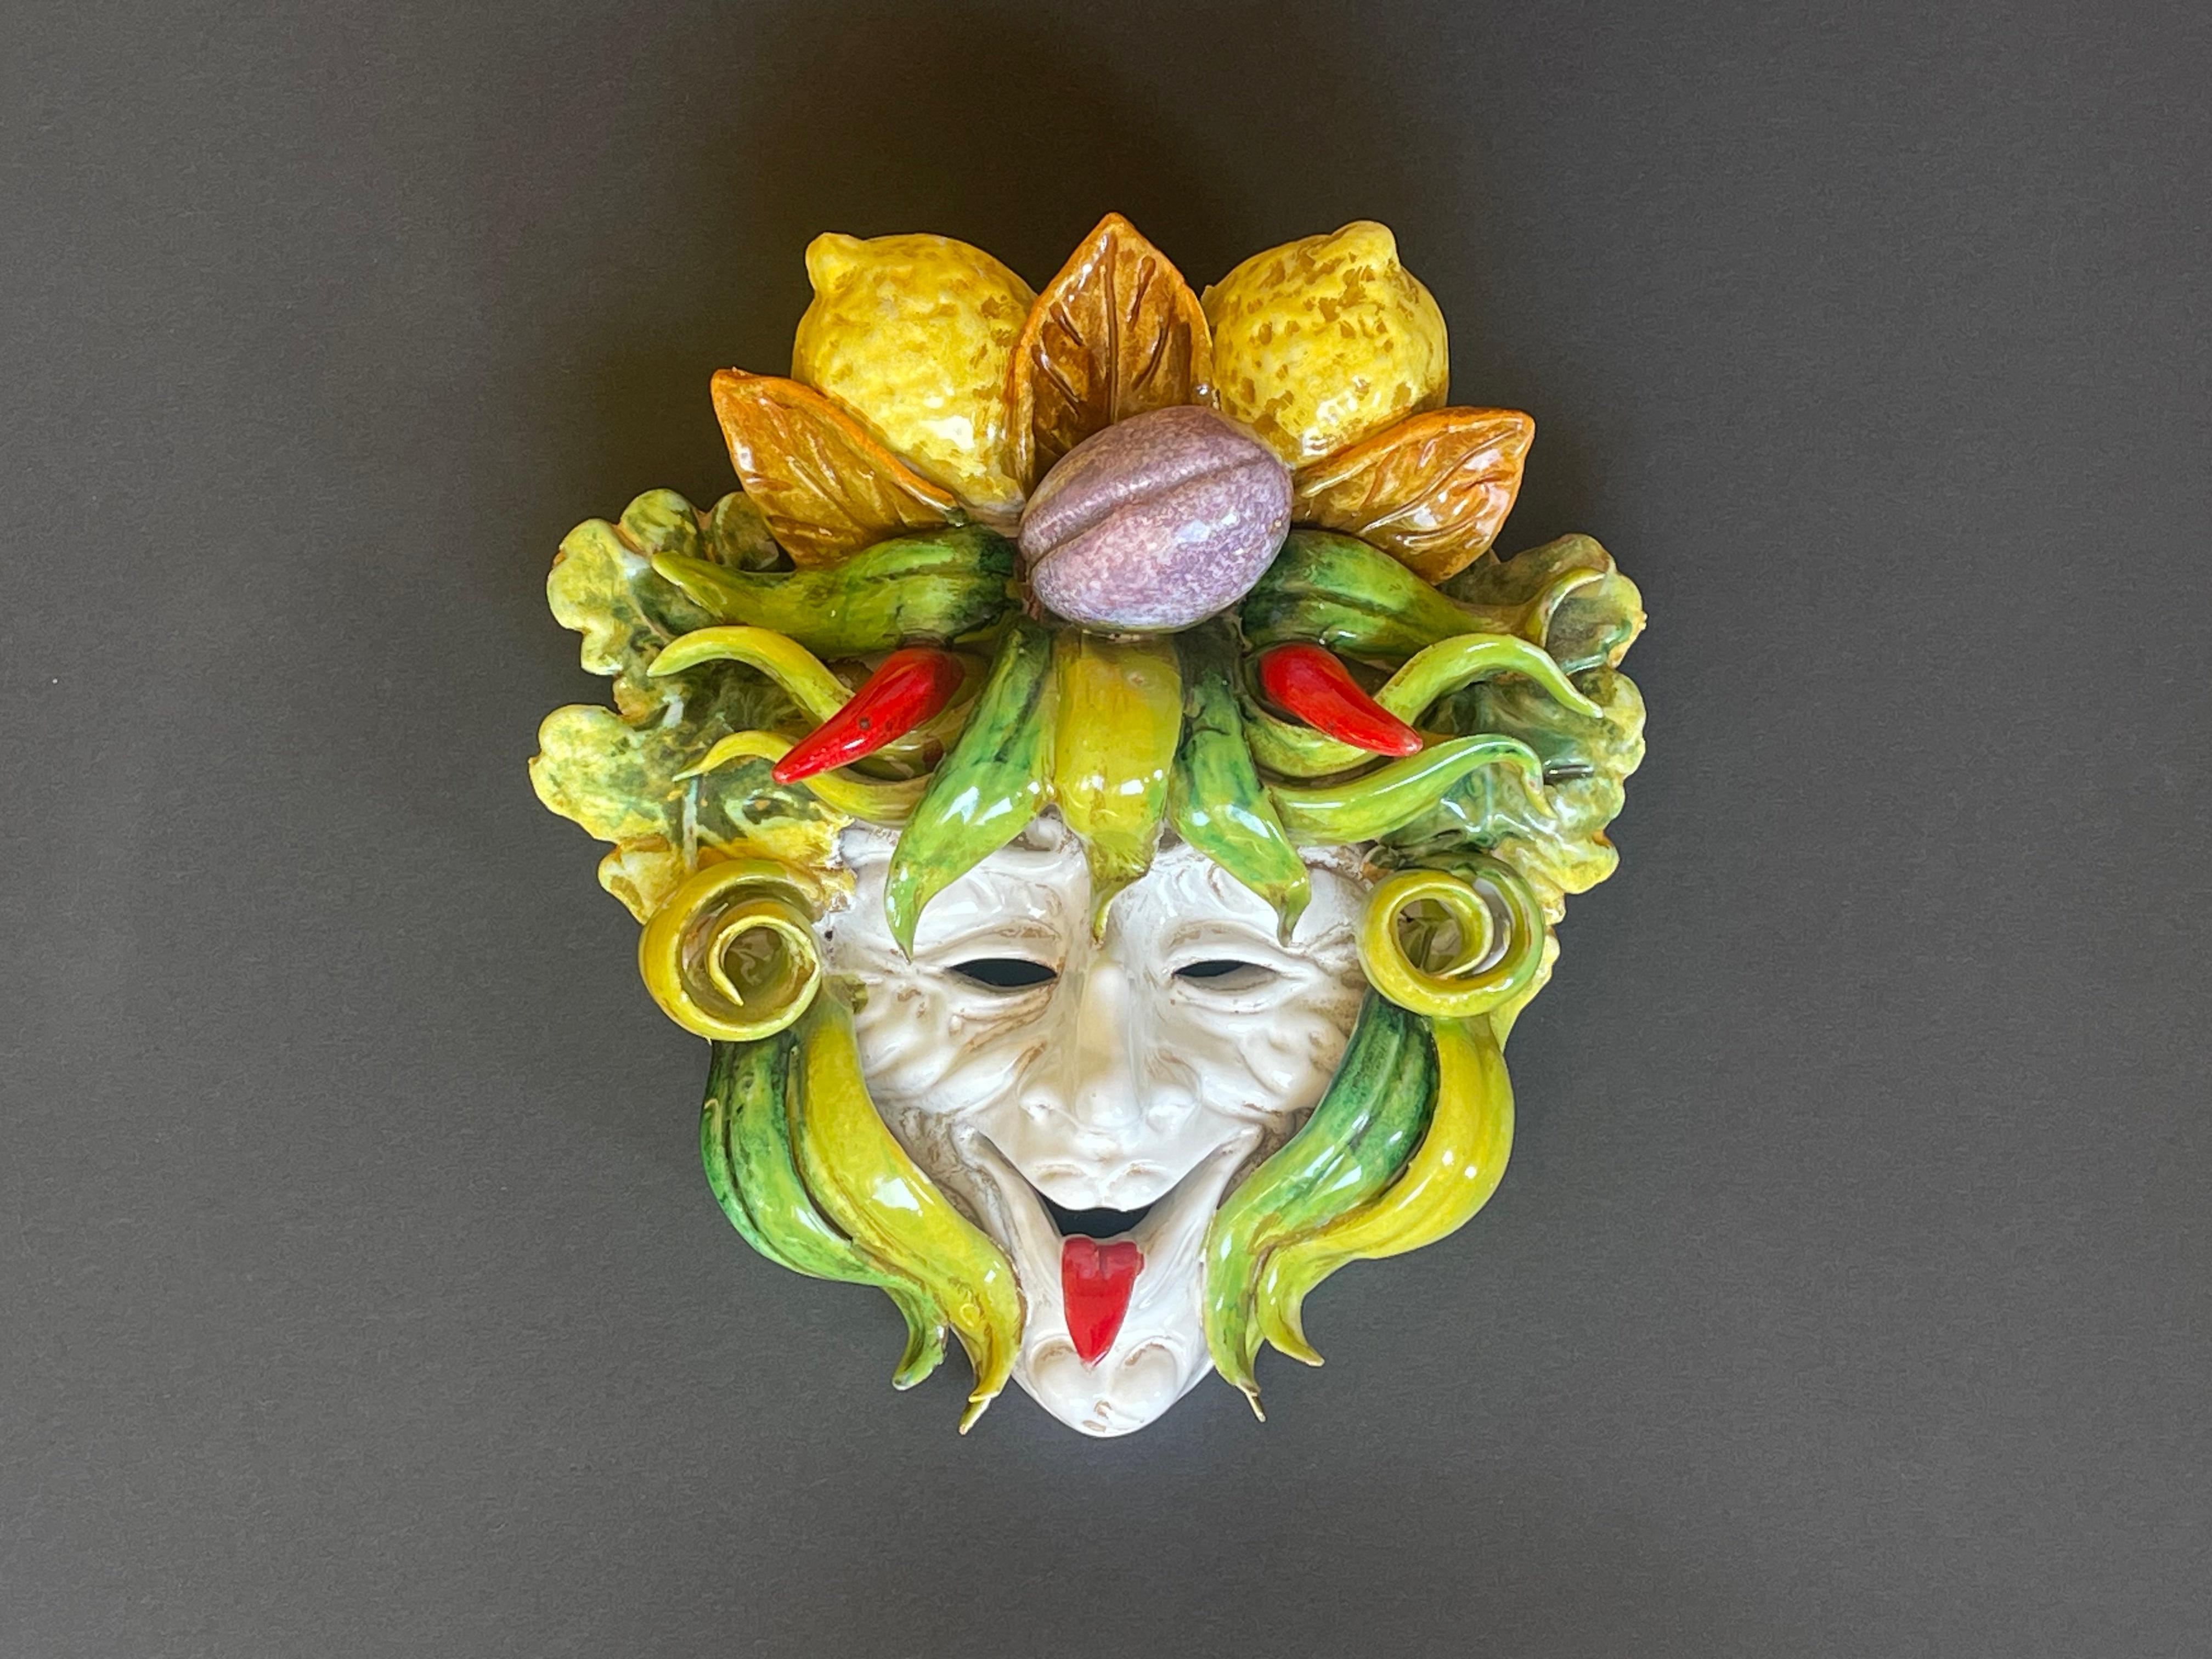 Absolutely impressive Bacchus in the shape of a jester carrying a full bounty of the harvest on his head:
there is fiery red pepperoni placed as horns, a juicy plum, lemons and plenty of lettuce and green vines.
Splendidly crafted Majolika ceramic